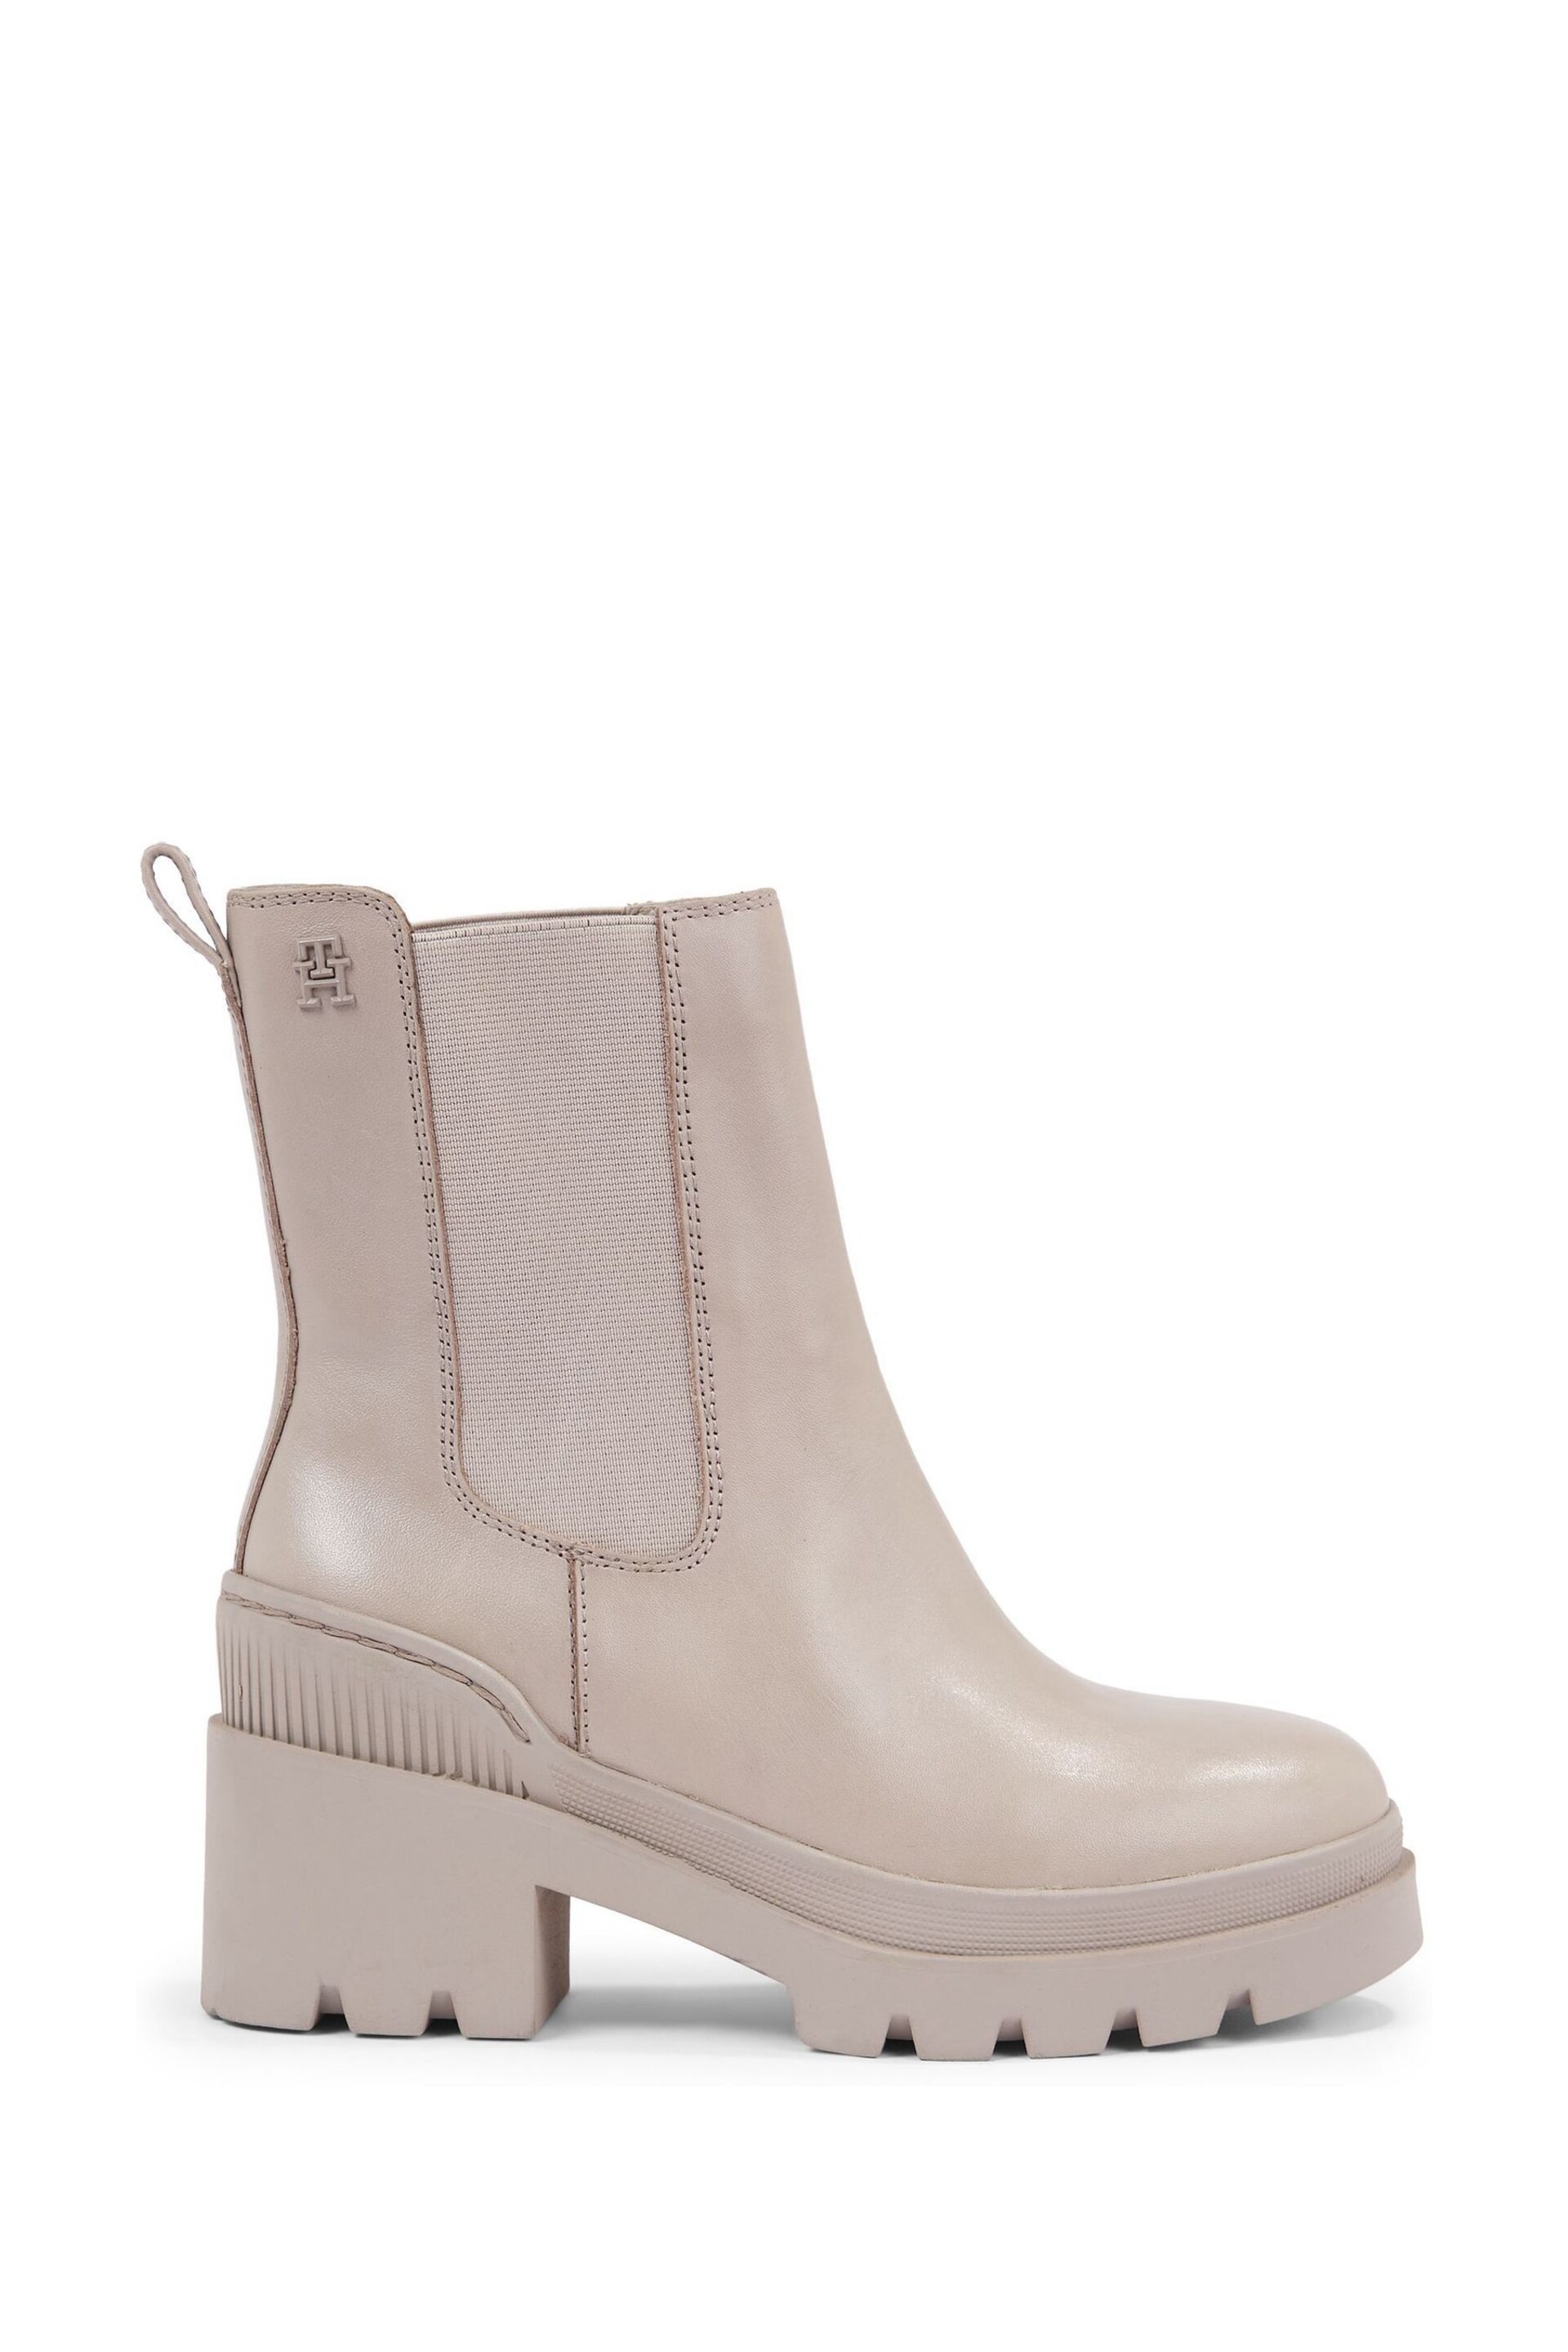 Tommy Hilfiger Cream Leather Mid Heel Boots - Image 1 of 3